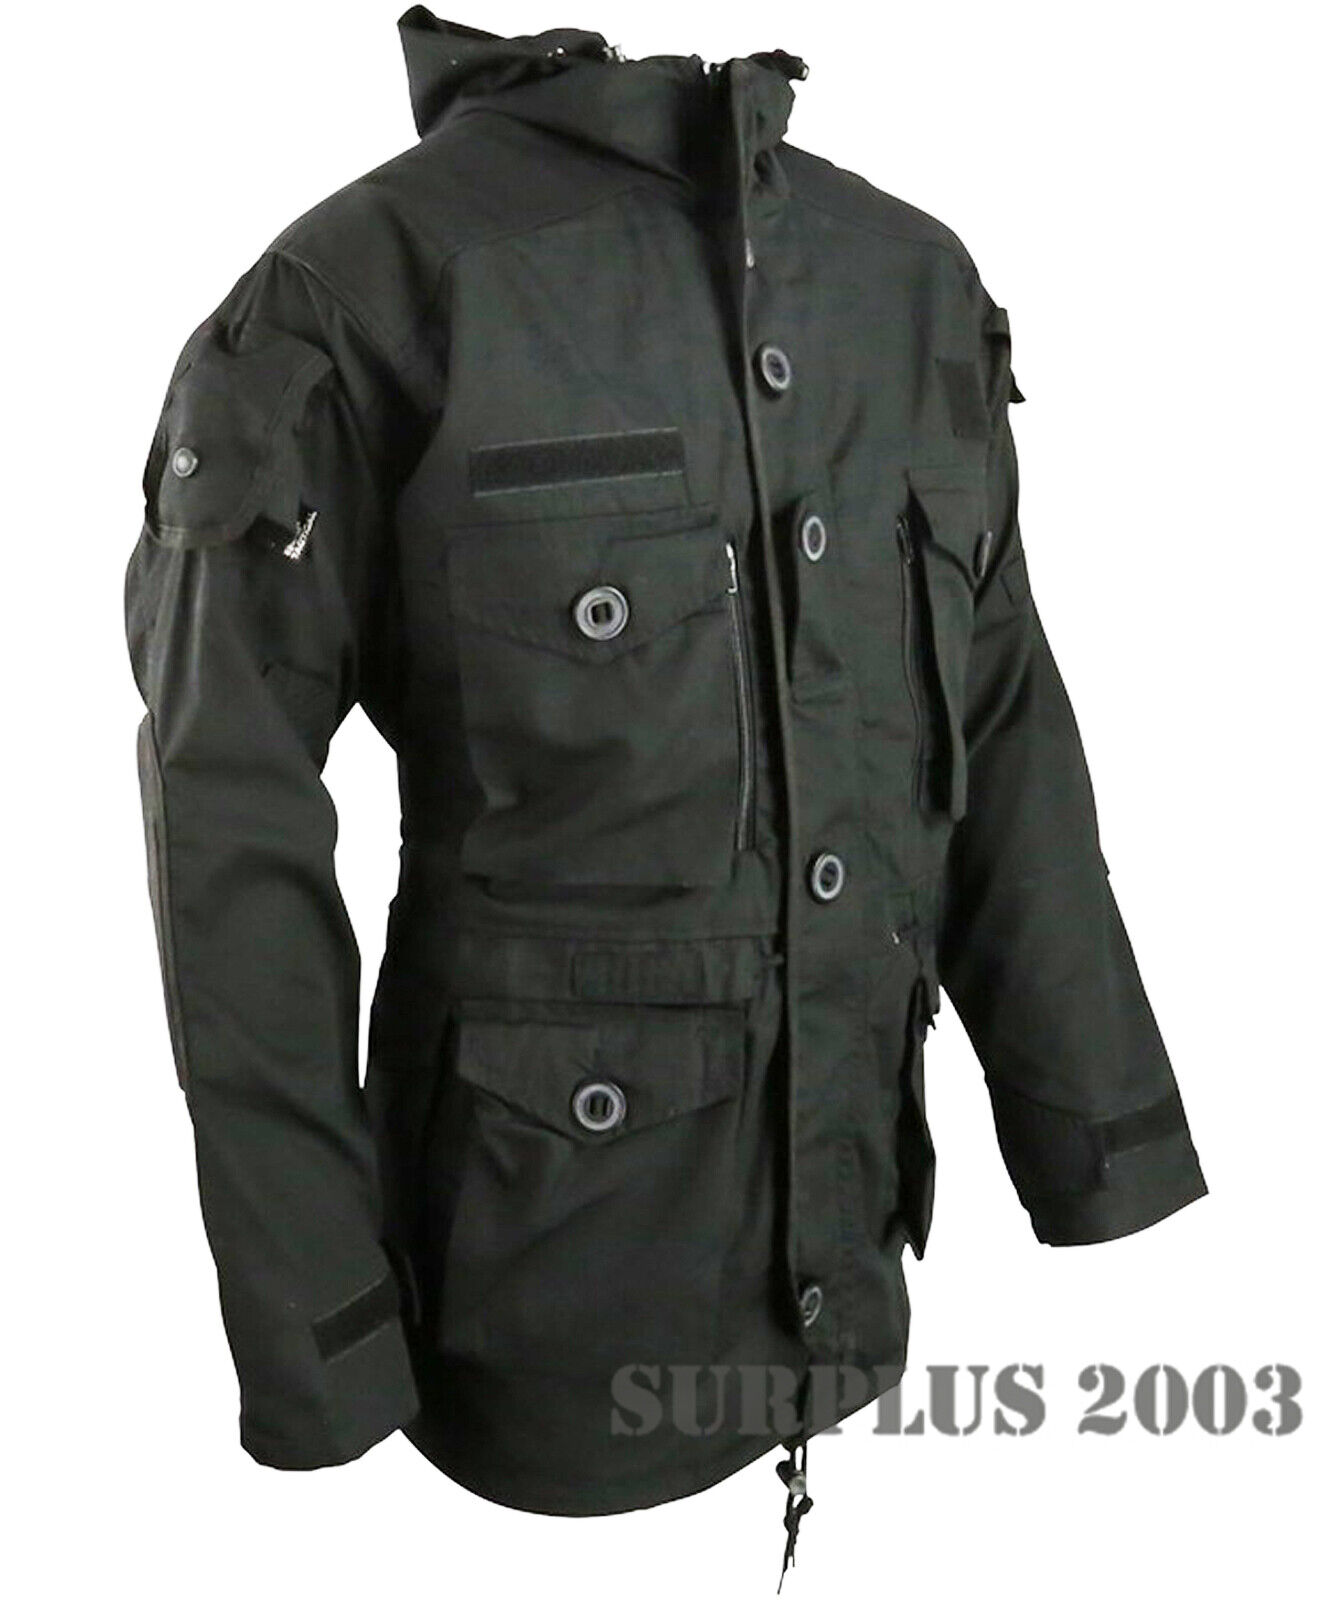 Black Special Forces SAS Style Assault Hooded Smock British Army Jacket